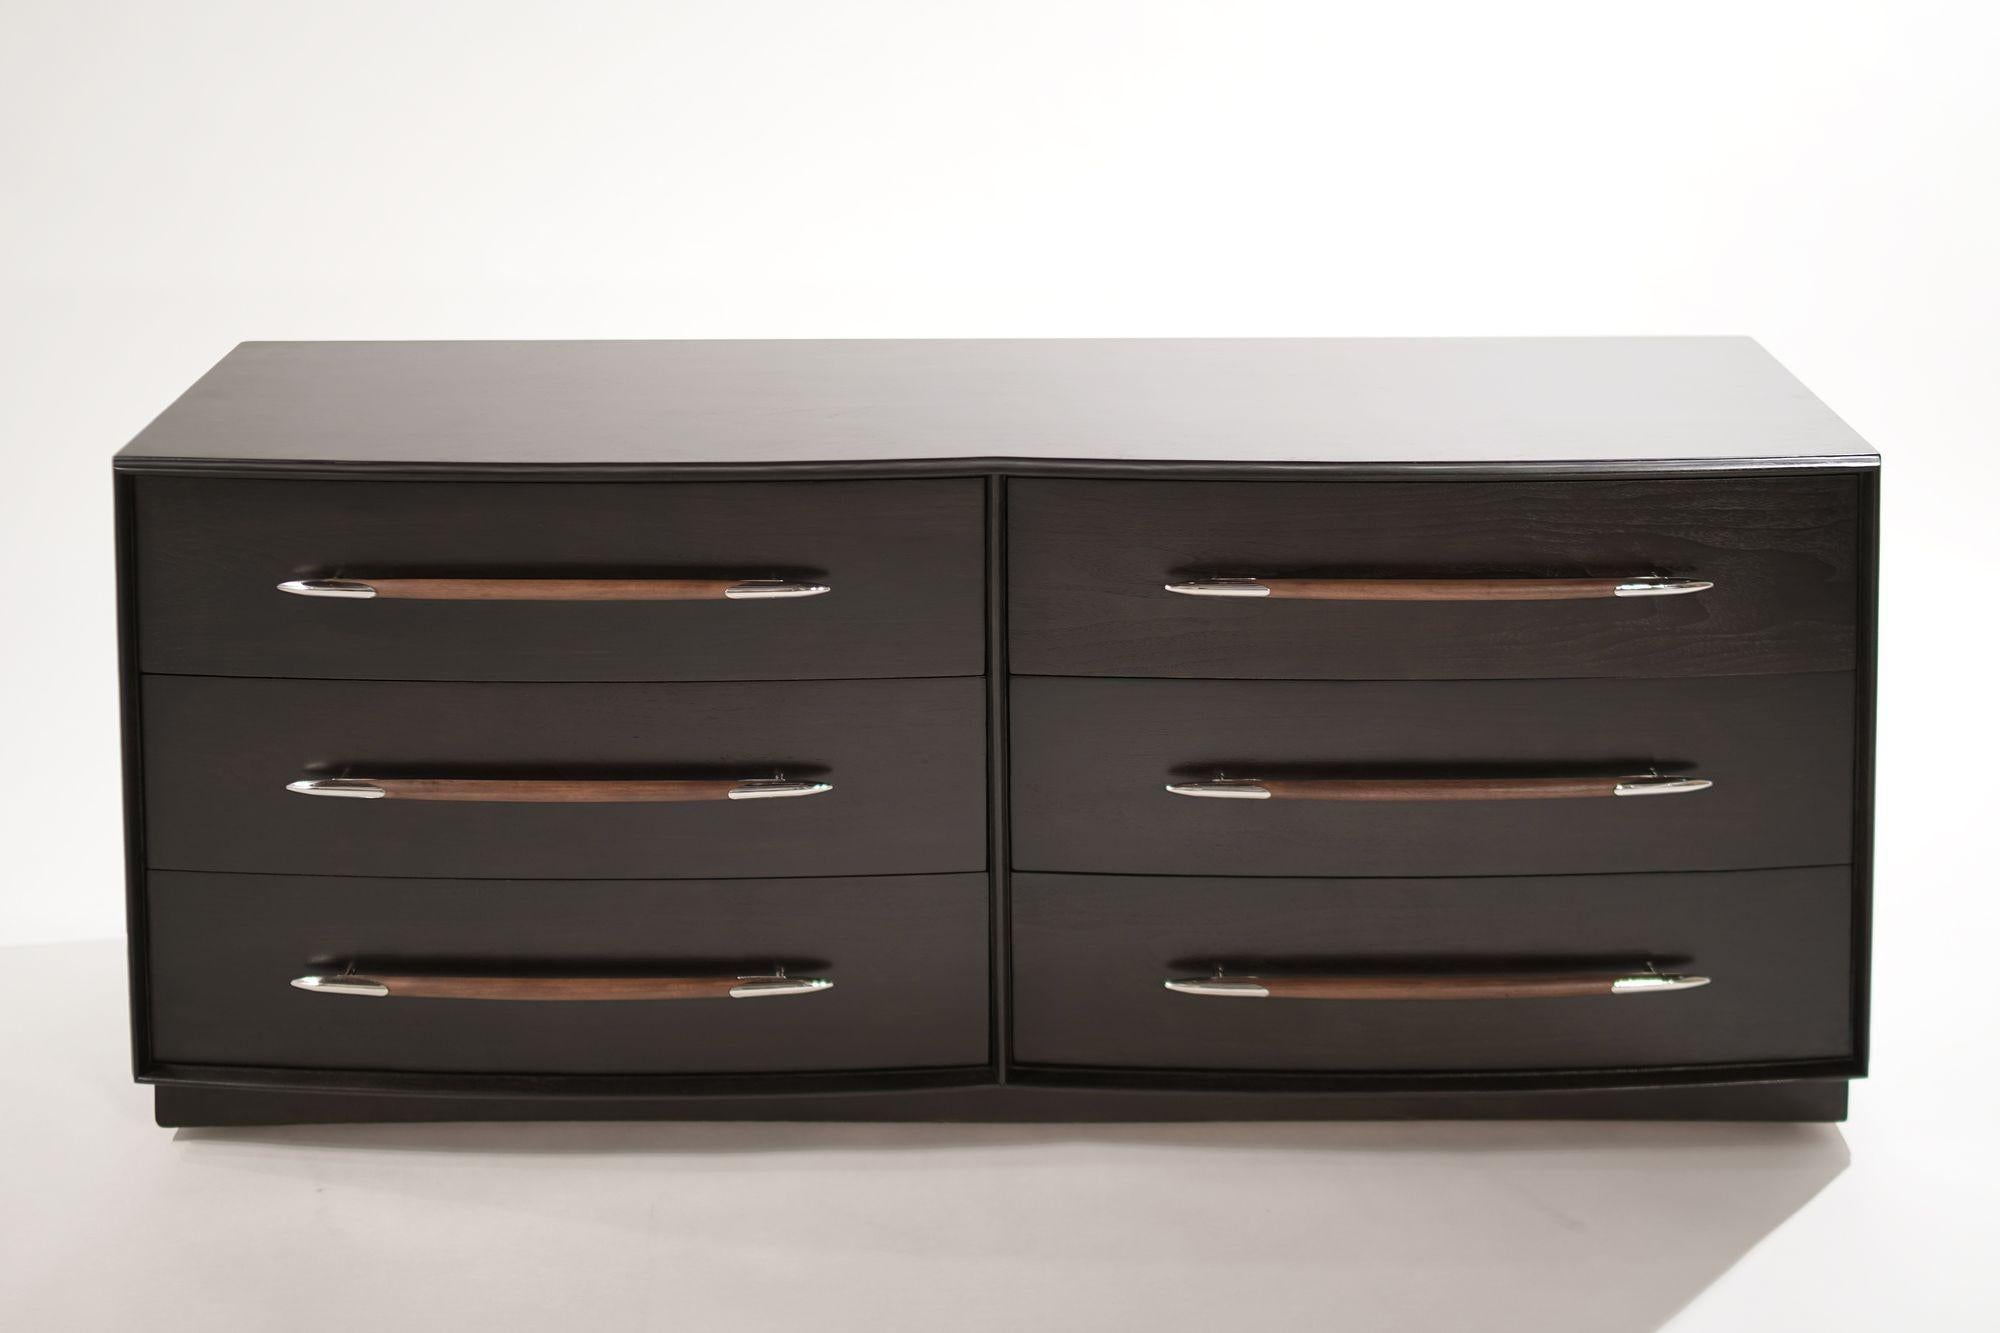 A six-drawer walnut dresser designed by T.H. Robsjohn-Gibbings for Widdicomb, circa 1950-1959. Completely restored and ebonized, featuring contrast walnut hardware with nickel spear tips. The six drawers are very large and allow ample storage